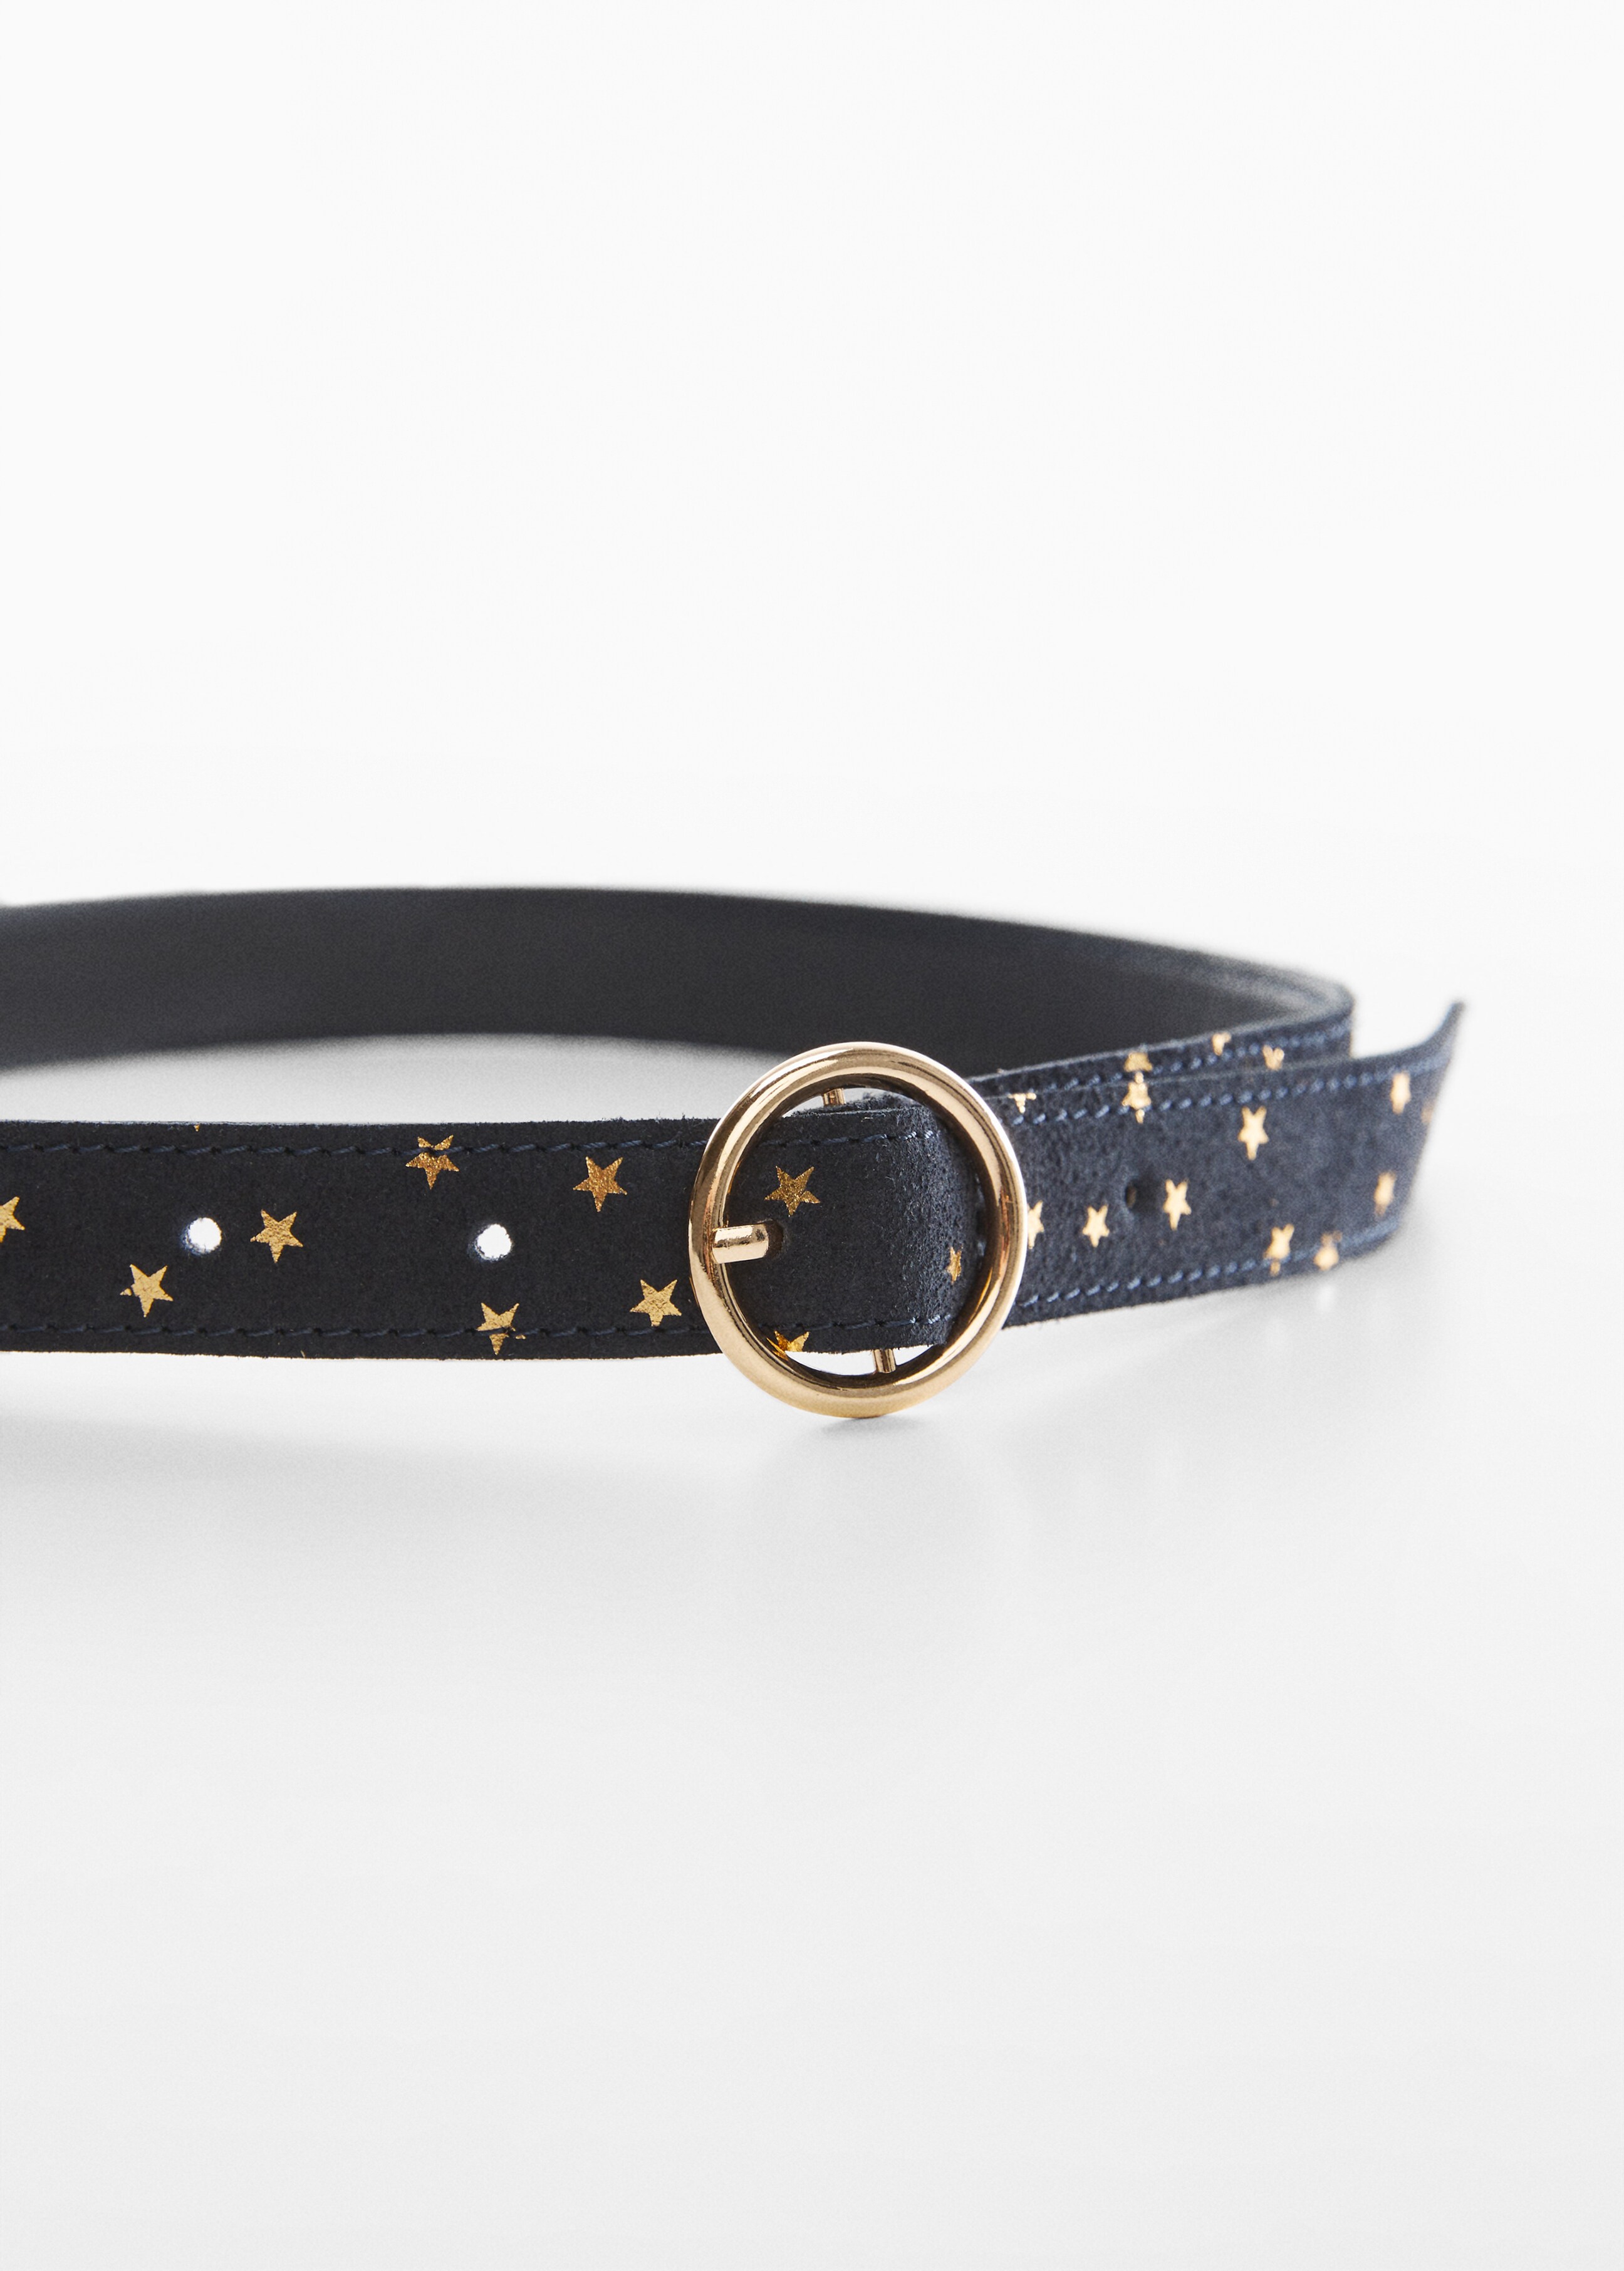 Stars leather belt - Details of the article 2